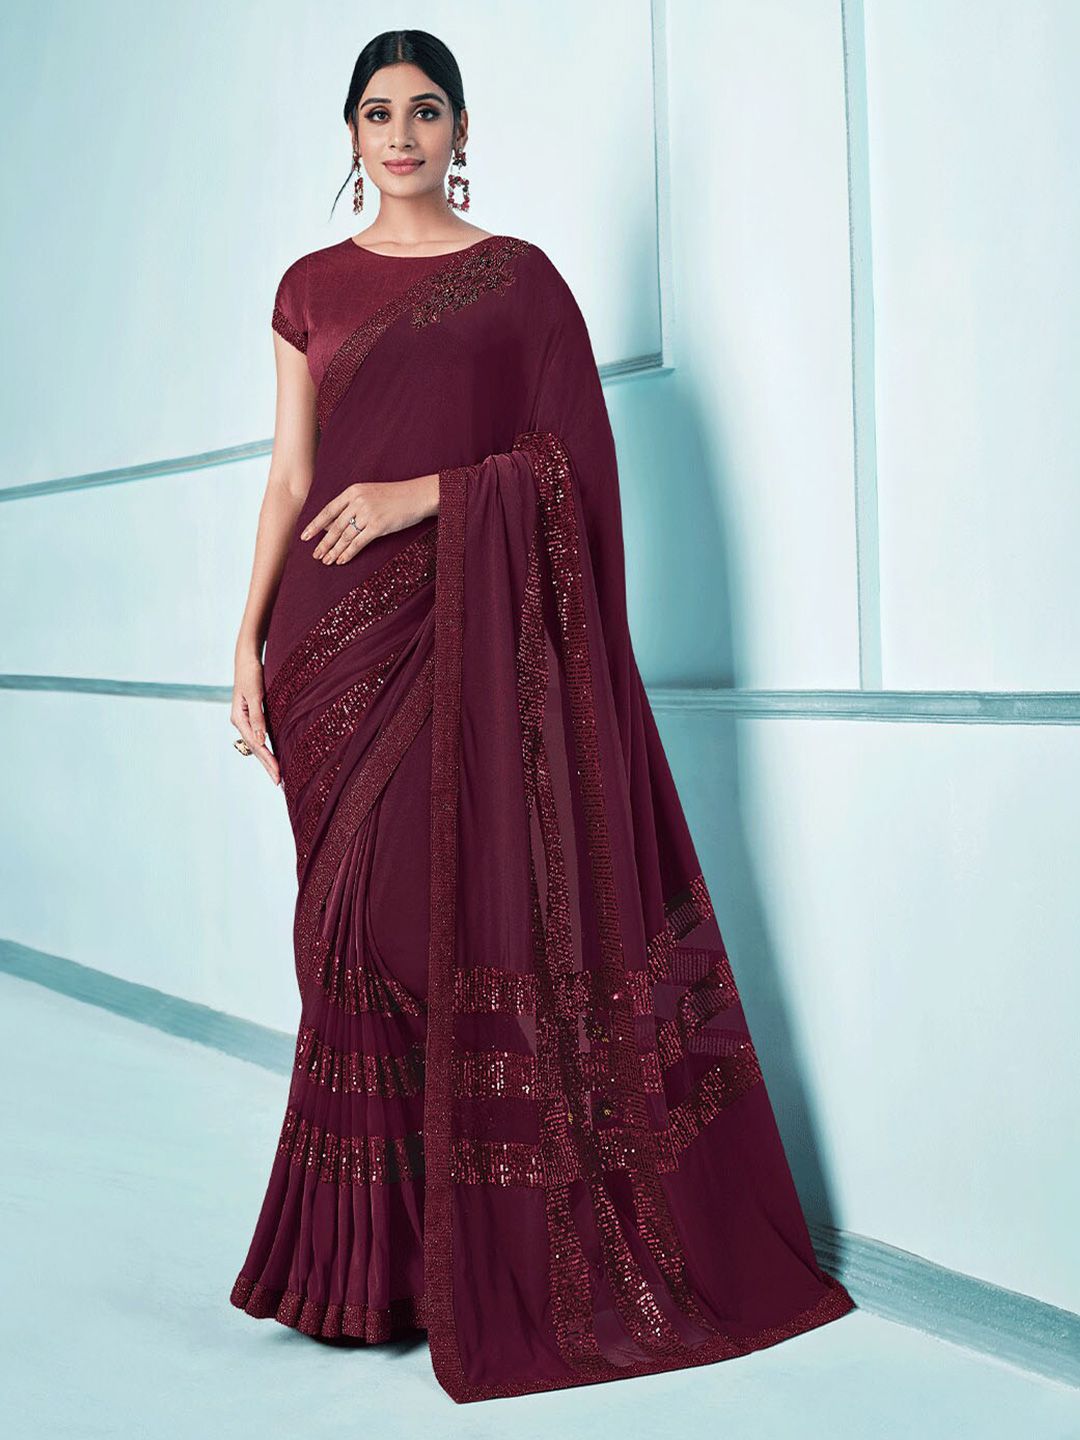 ODETTE Maroon Beads and Stones Saree Price in India